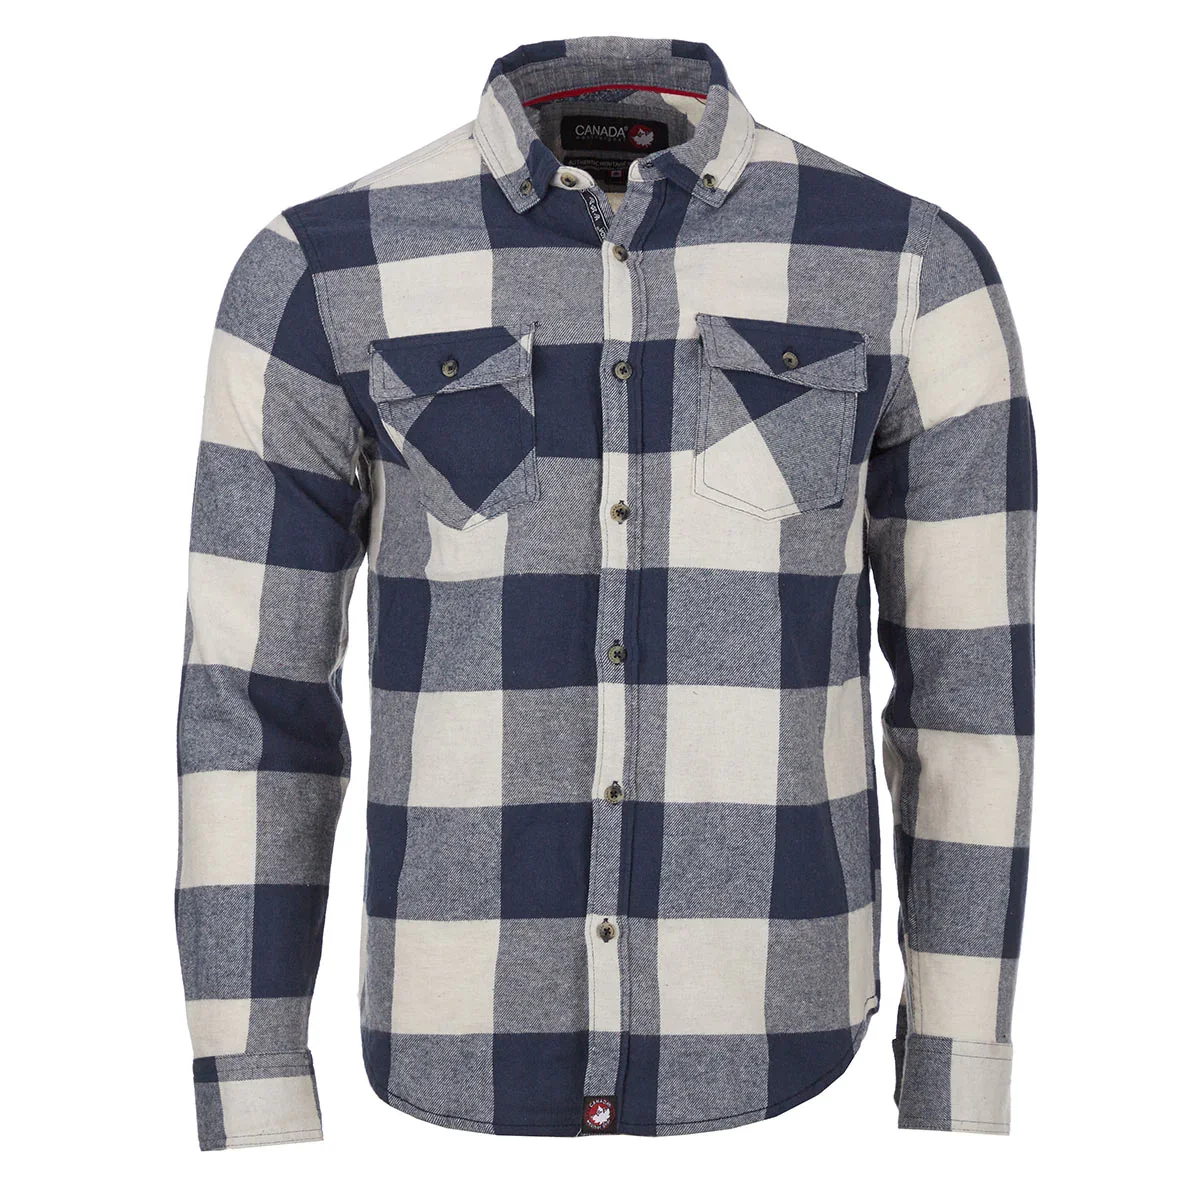 Image of Canada Weather Gear Men's Unlined Flannel